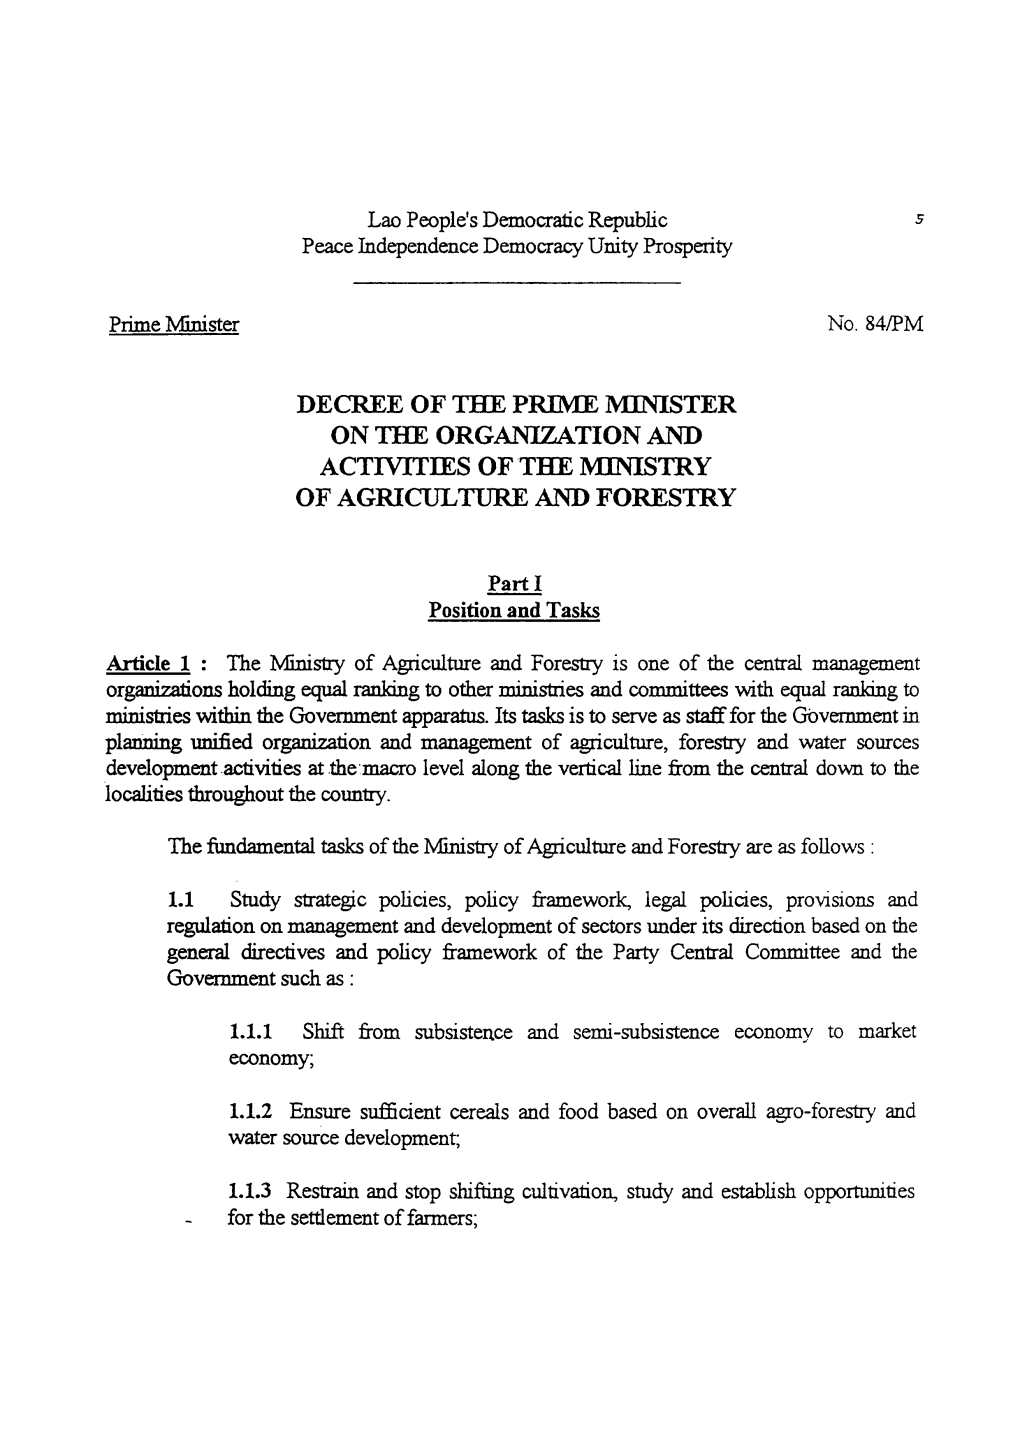 DECREE of the Pril\1E :MINISTER on the ORGANIZATION and ACTIVITIES OFTHE MINISTRY of AGRICULTURE and FORESTRY